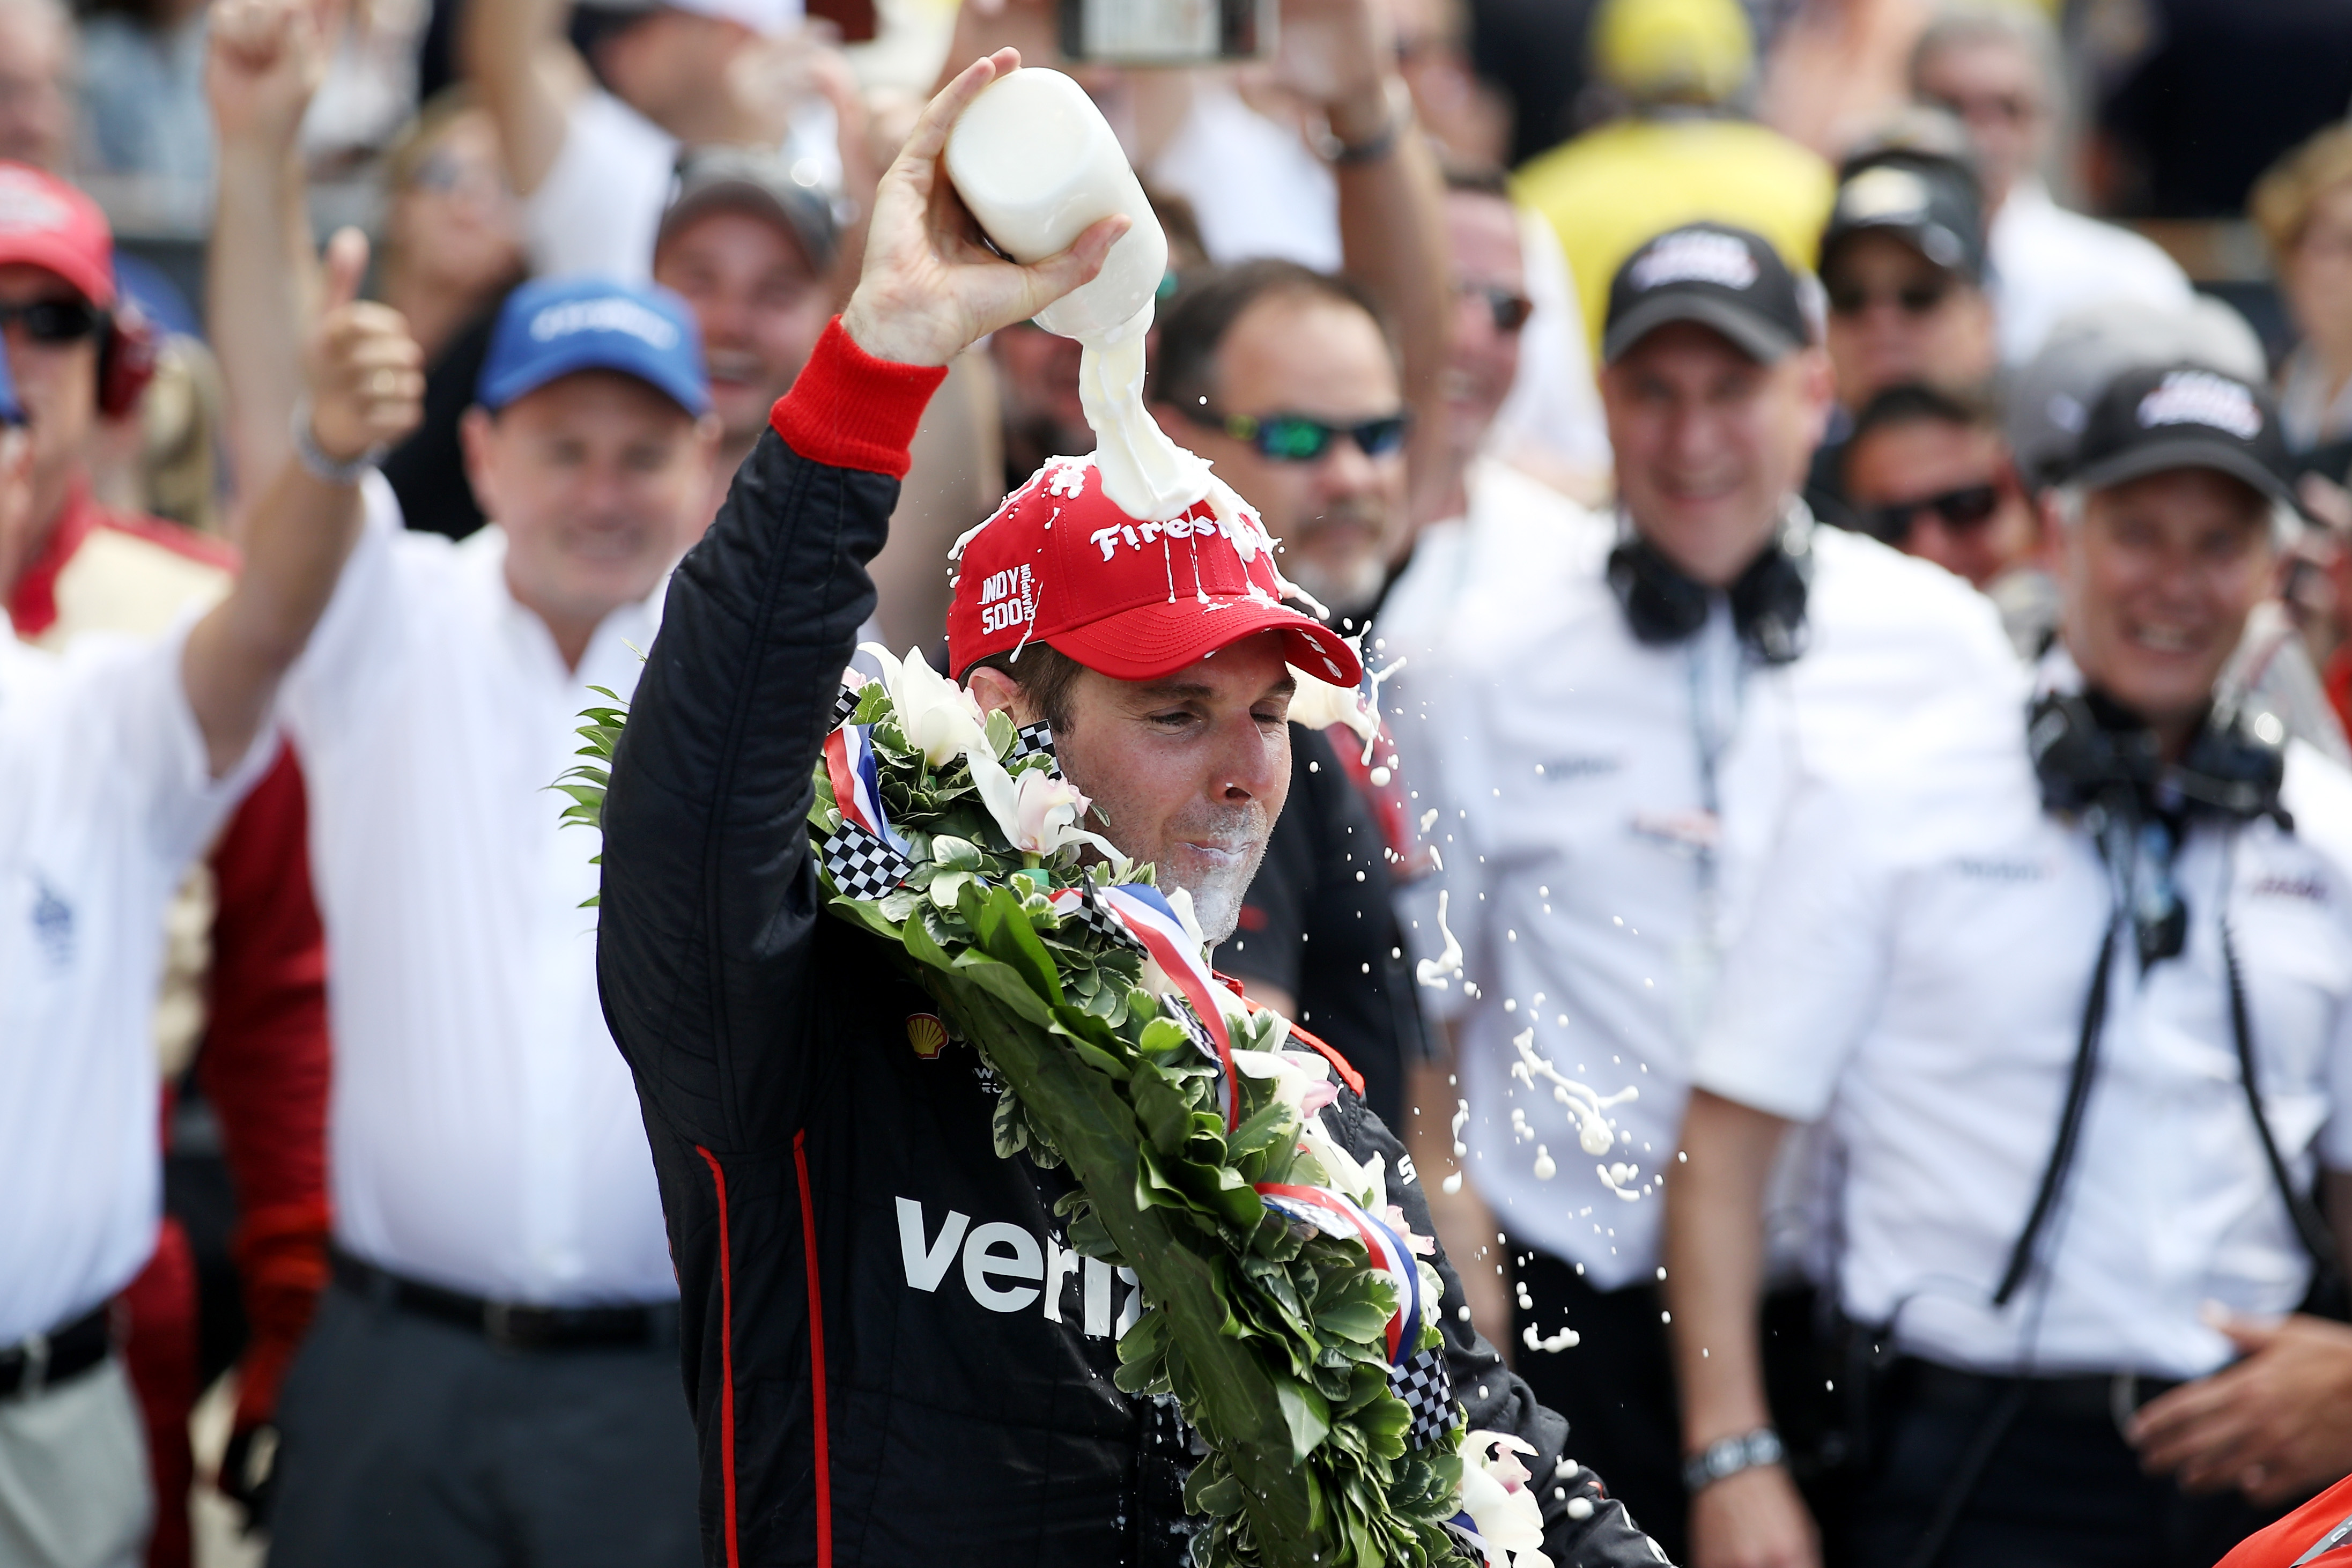 12 glorious photos of Will Power’s Indy 500 victory celebration